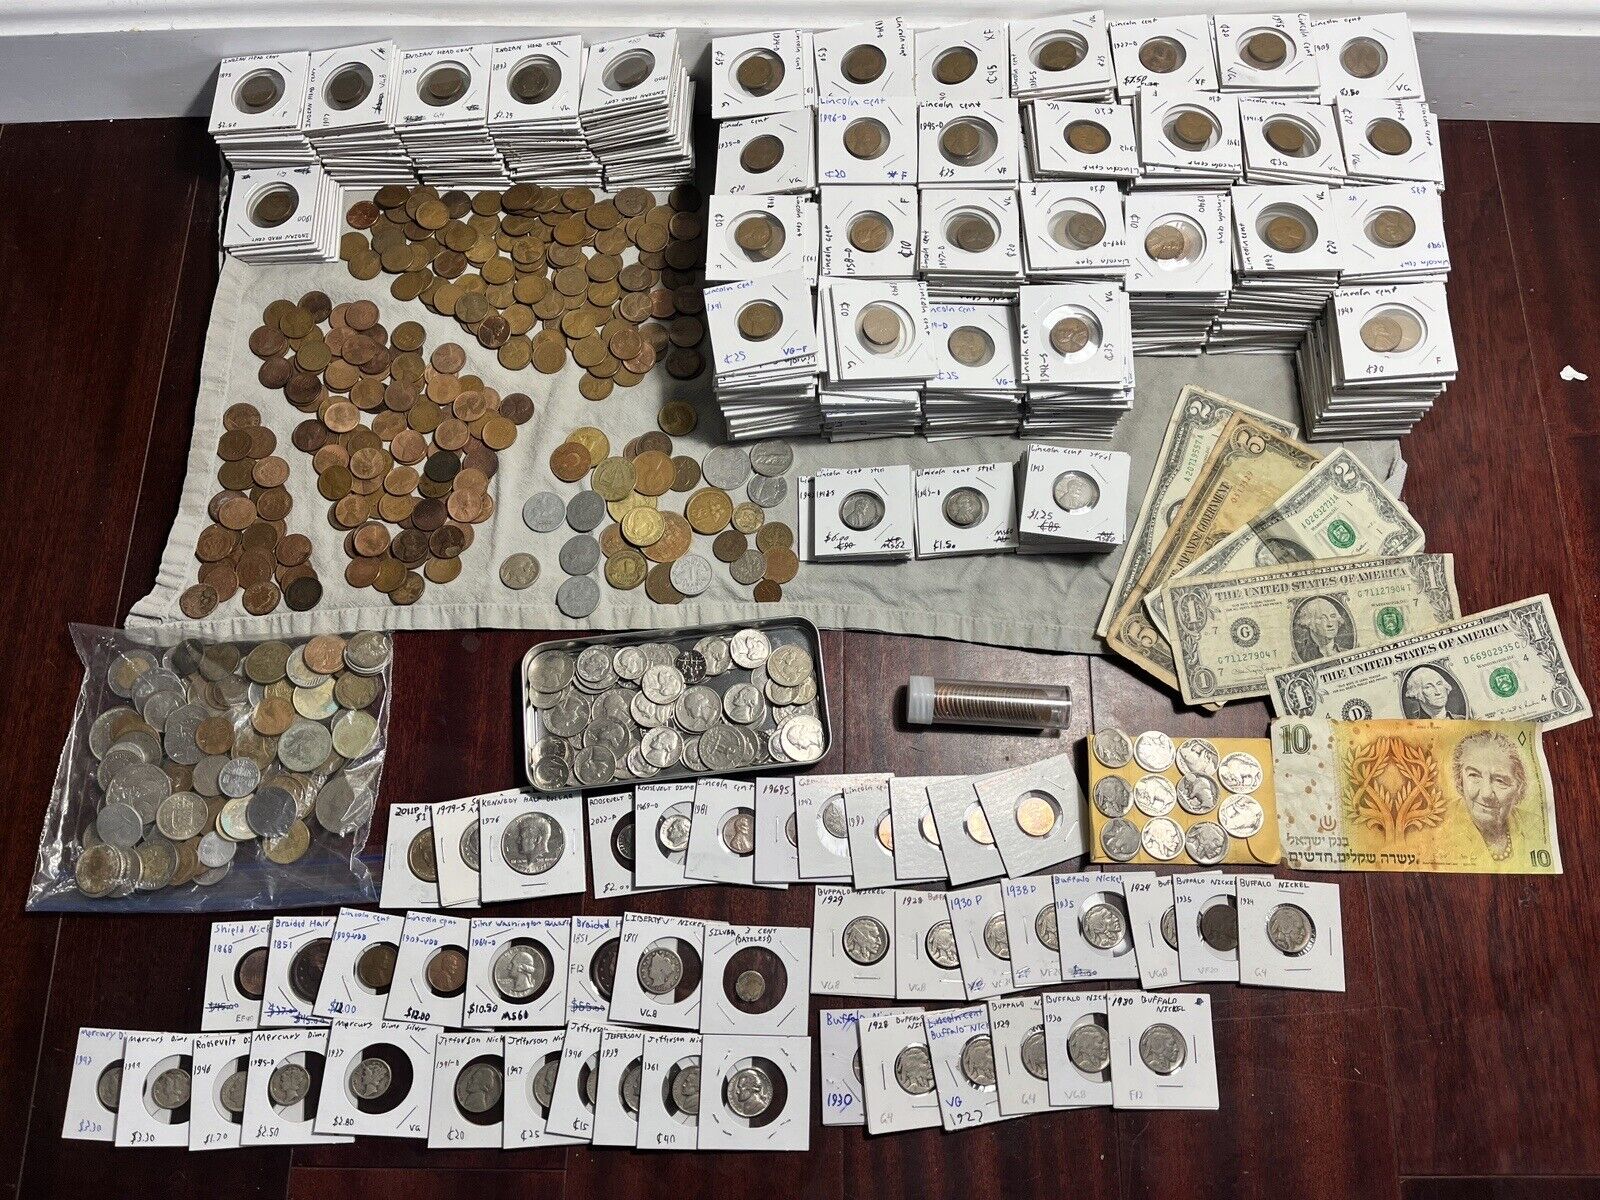 Huge Old Us Coin Collection LotUs,1909VDB,Silver,Banknotes,IndianHead,&Foreign